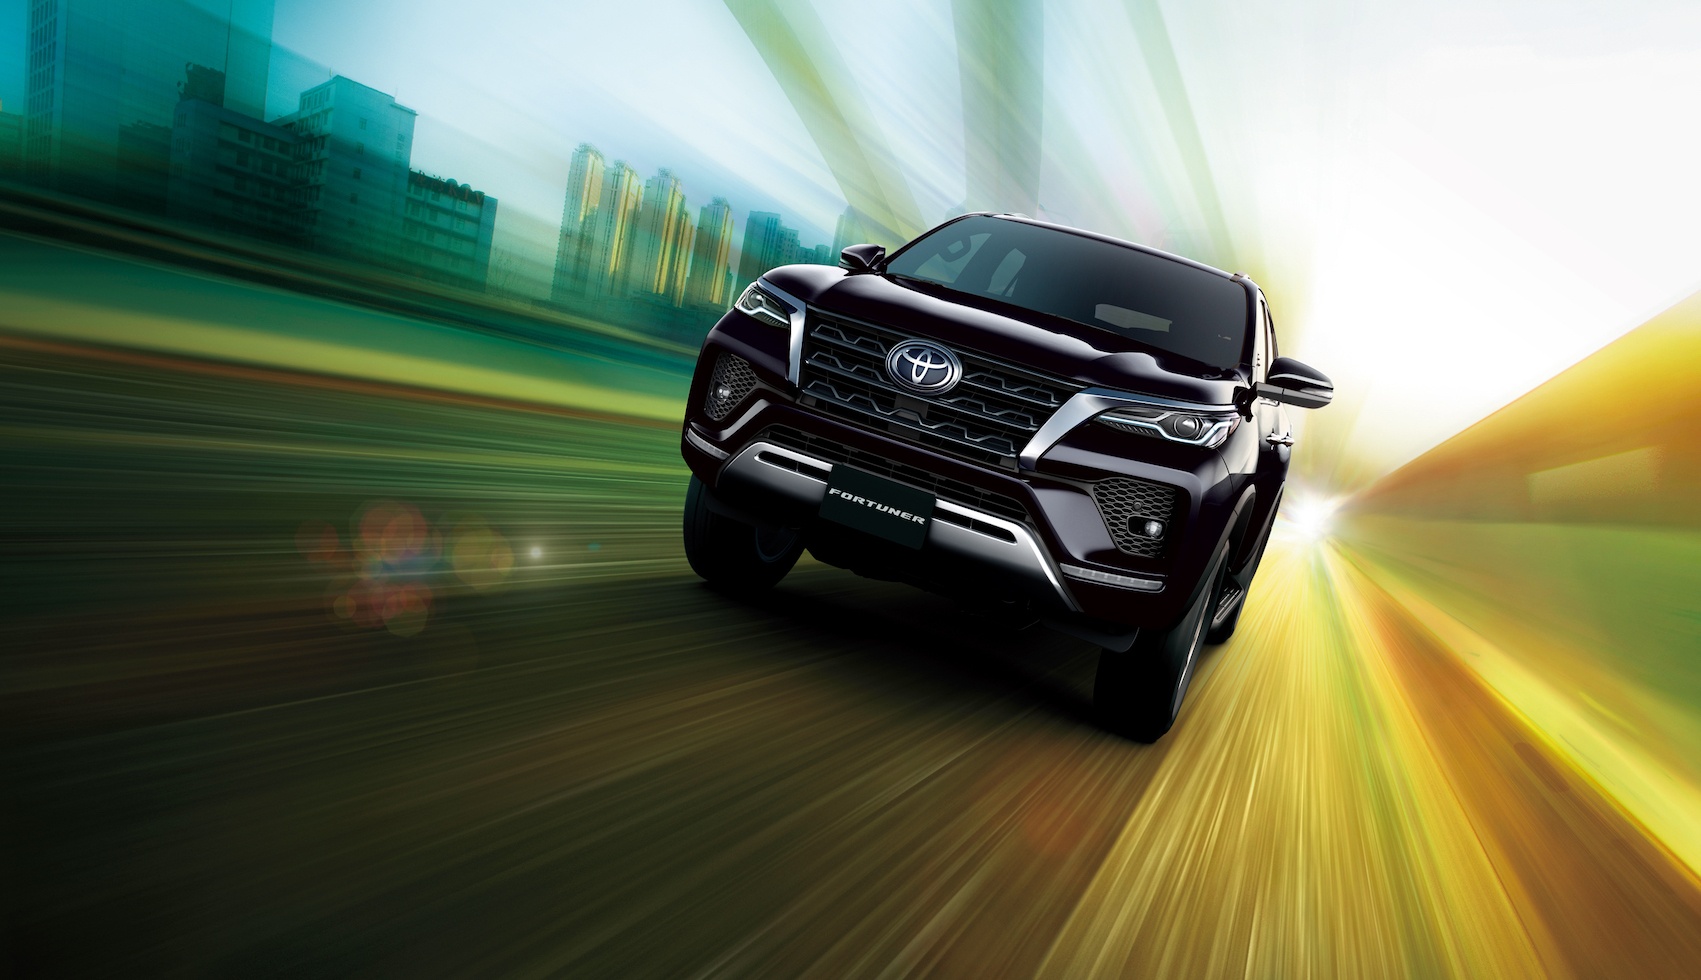 New 2021 Toyota Fortuner pairs stylish design and advanced connected technology with off-road capabilities